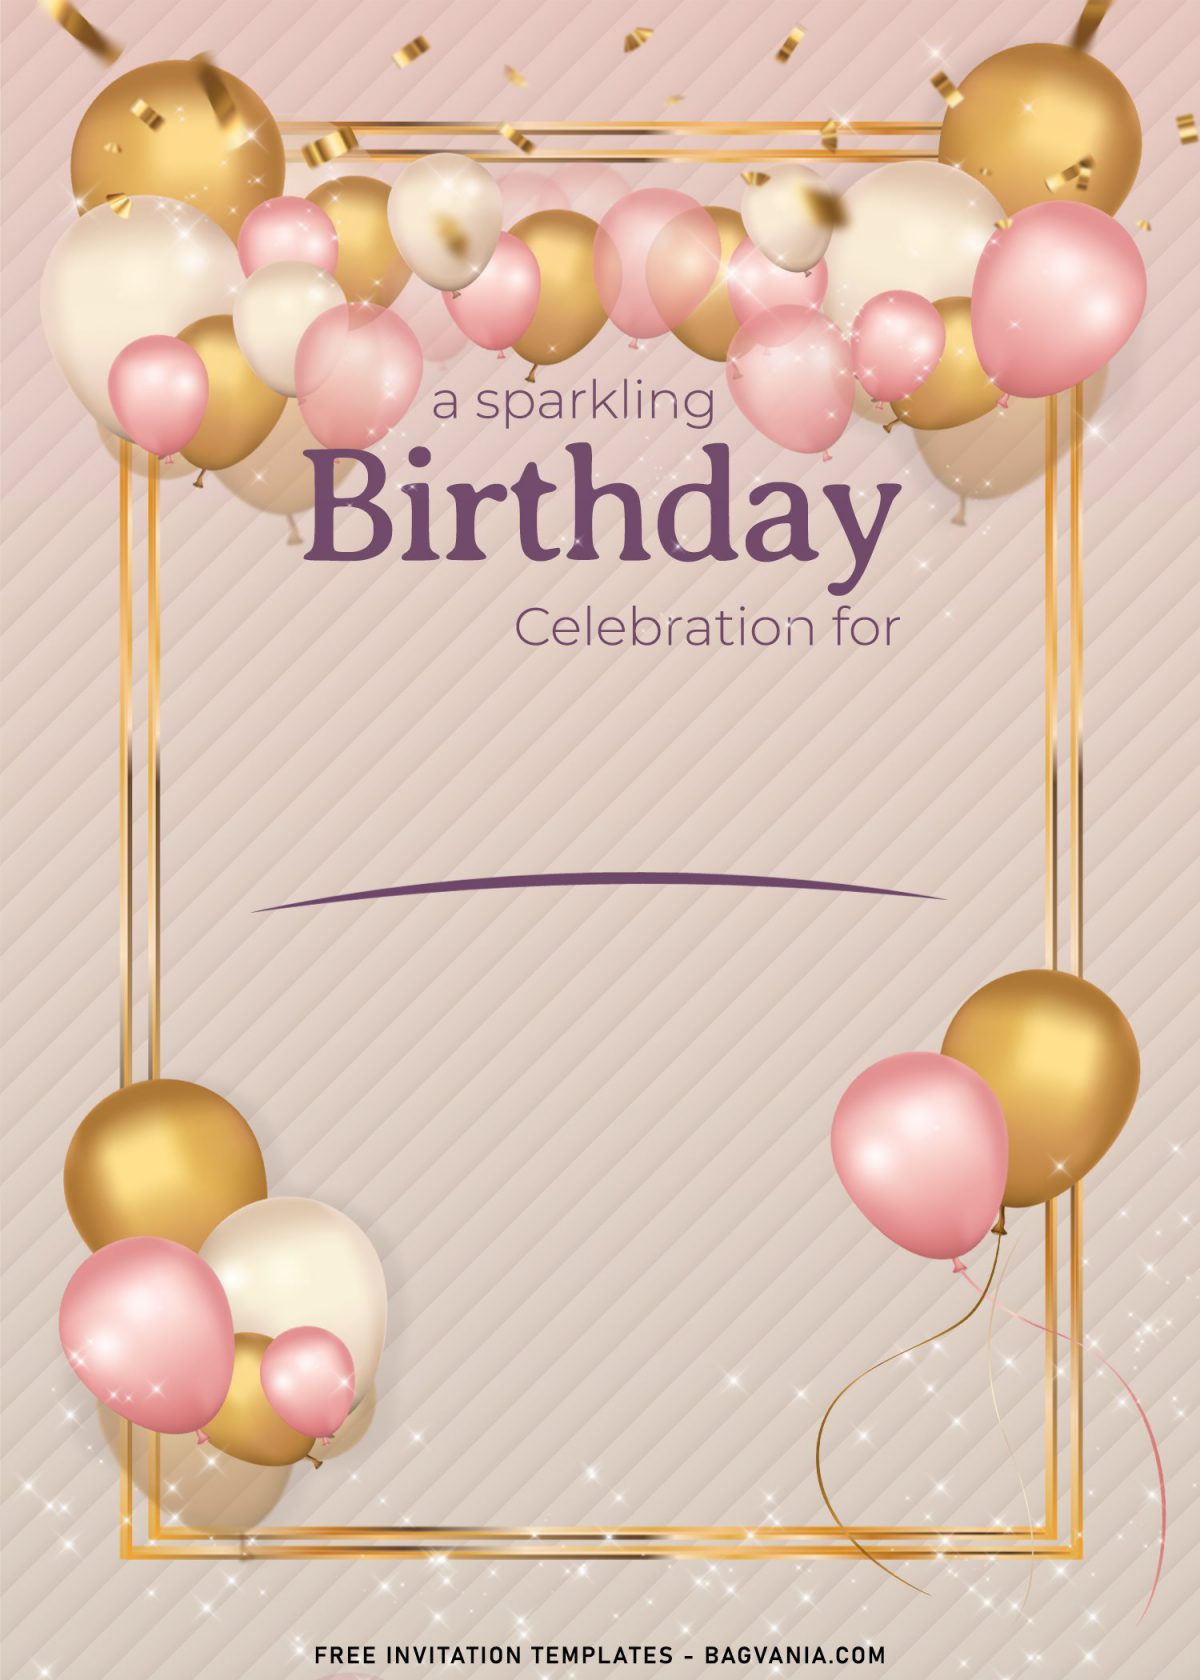 10+ Sparkling Balloons Birthday Invitation Templates Suitable For All Ages with sparkling confetti